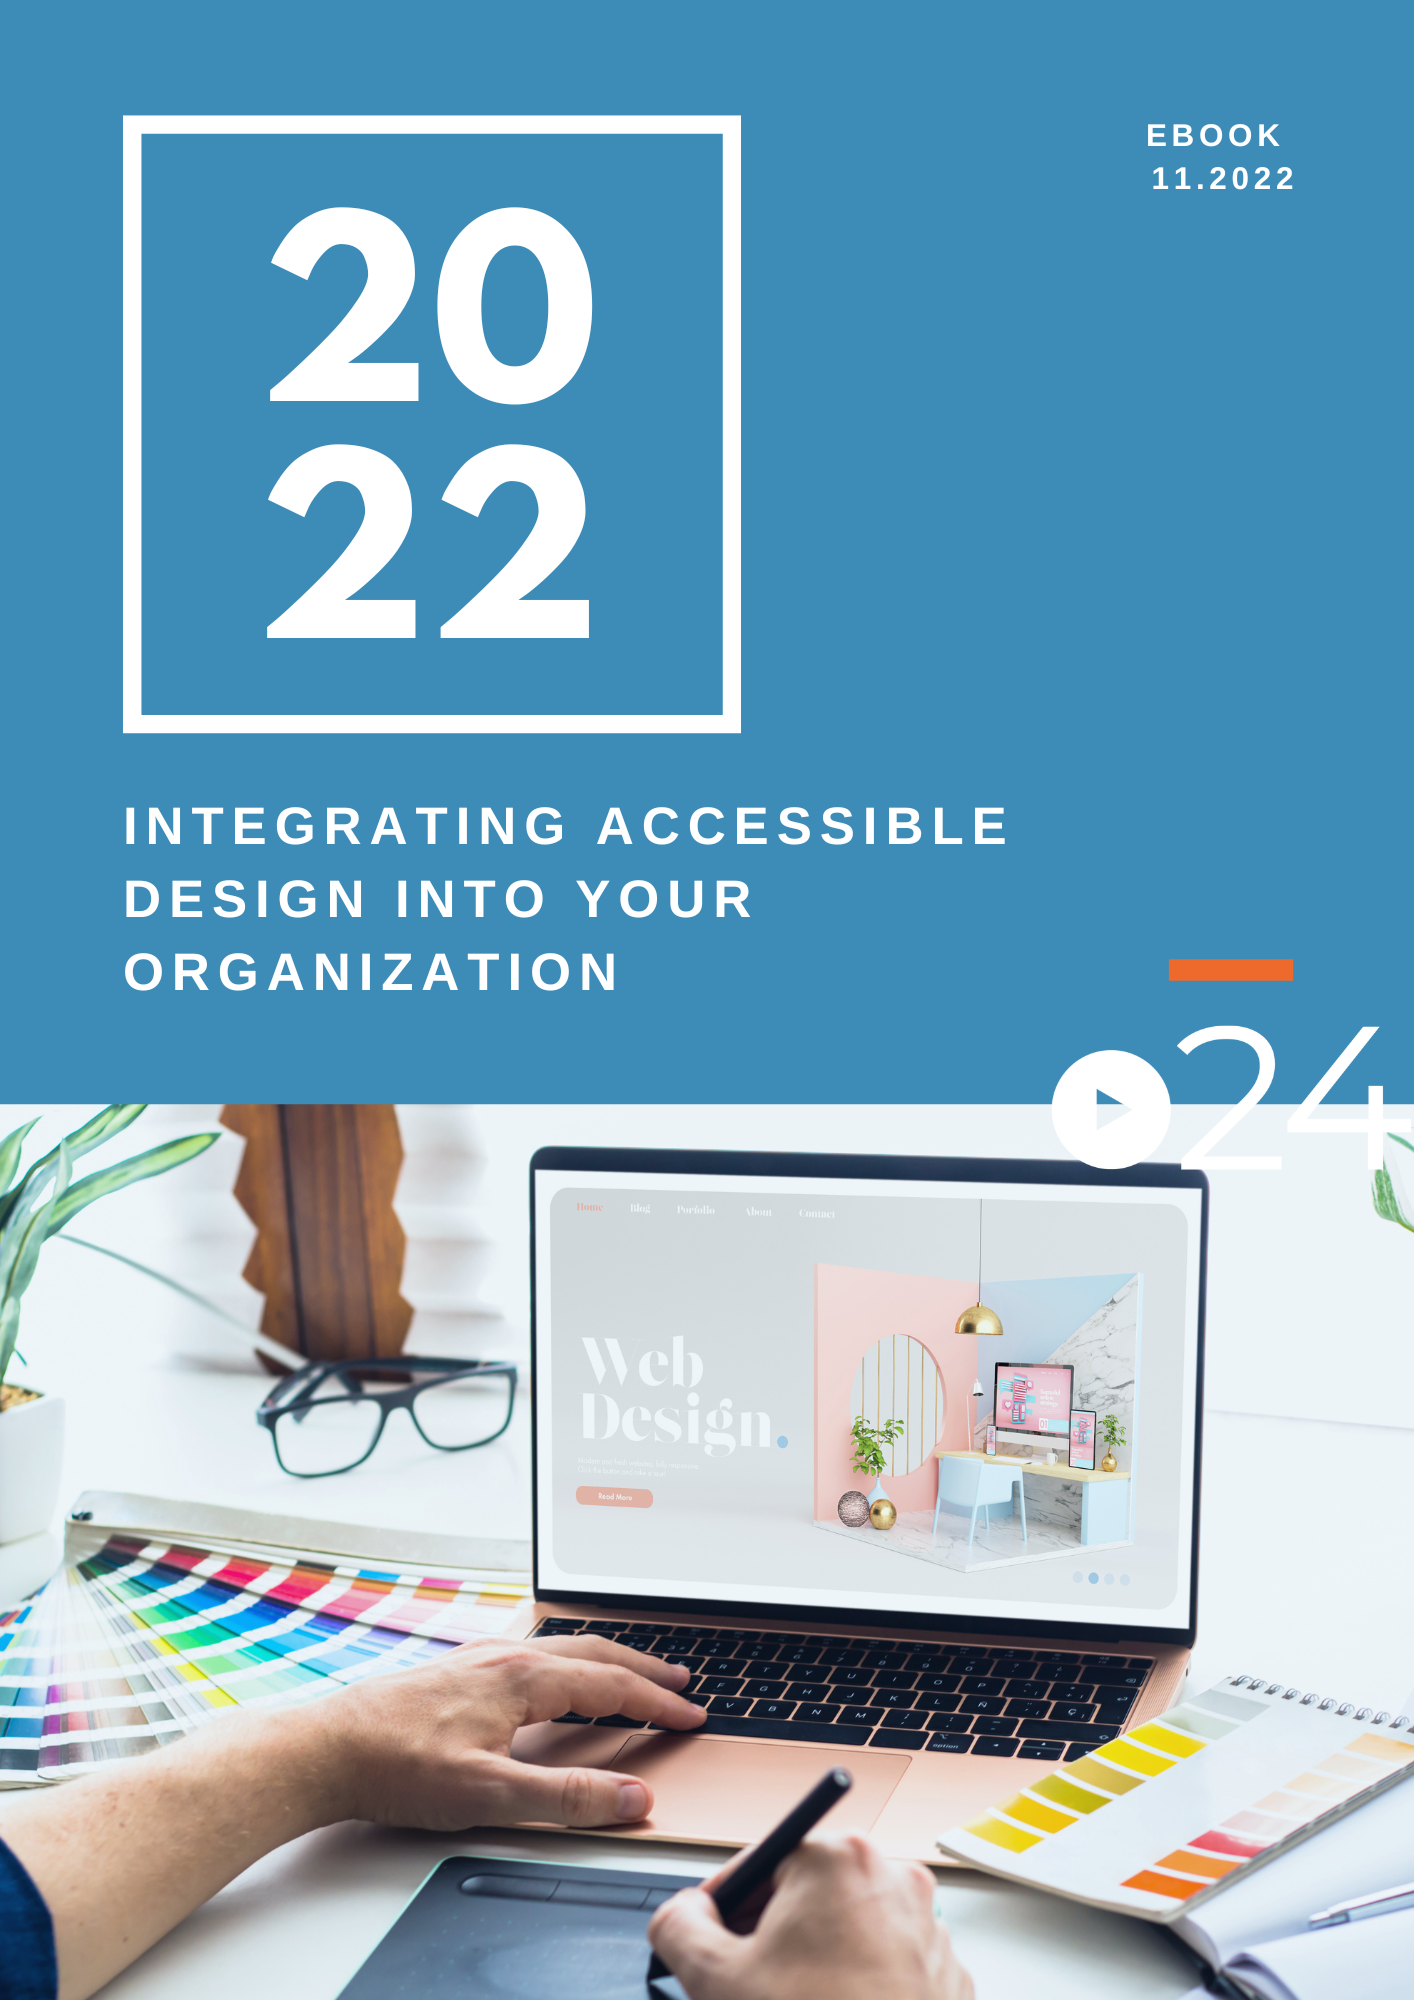 Integrating Accessible Design Into Your Organization eBook cover